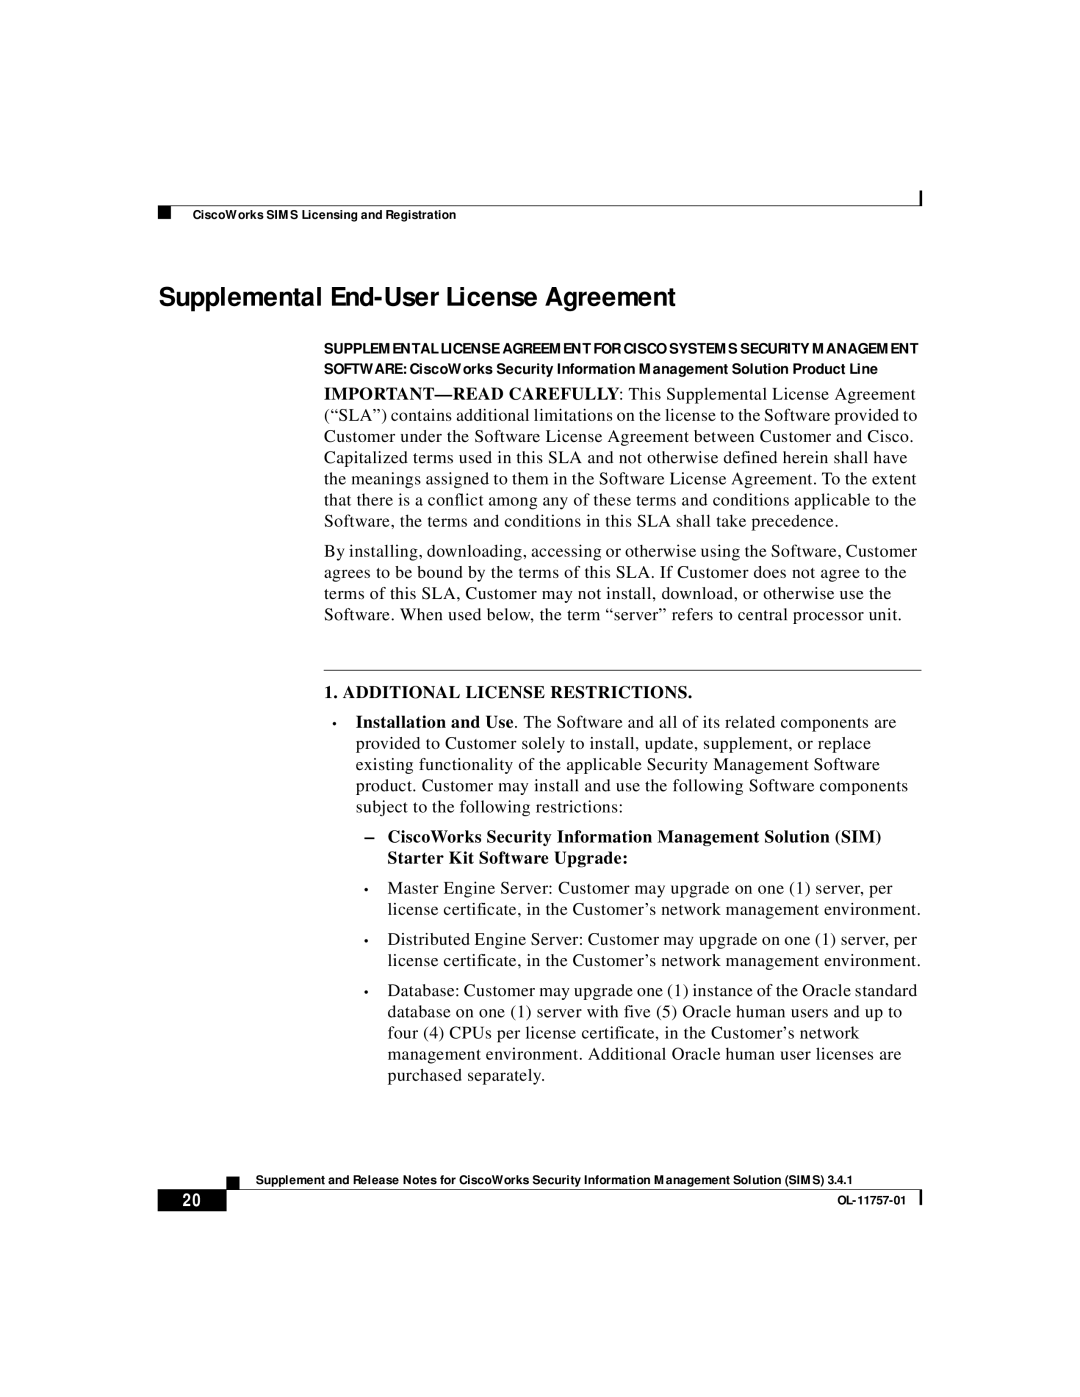 Cisco Systems OL-11757-01 manual Supplemental End-UserLicense Agreement, Additional License Restrictions 